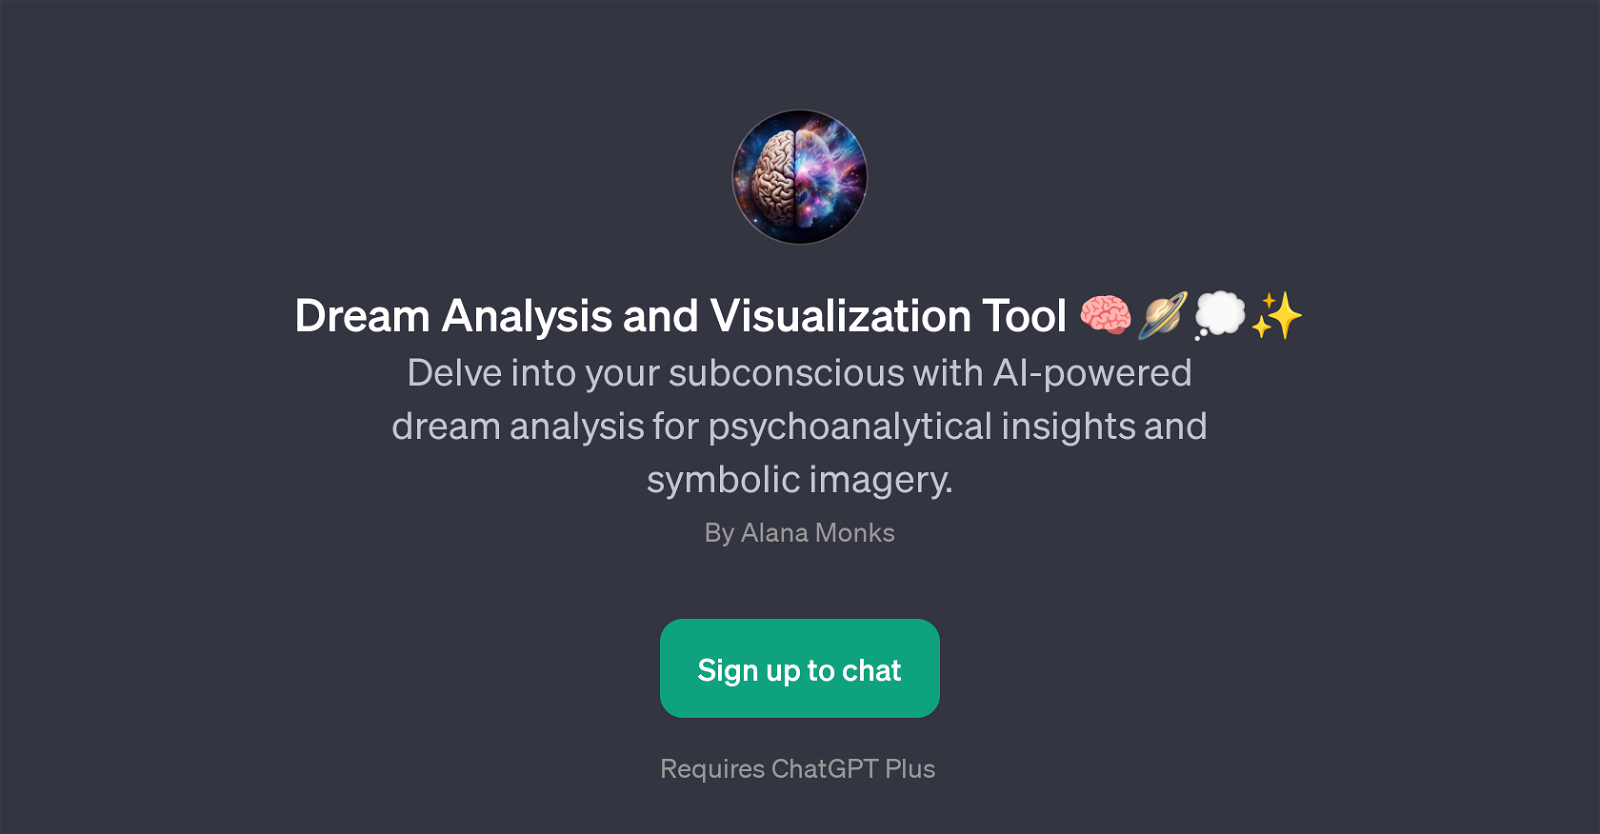 Dream Analysis and Visualization Tool website